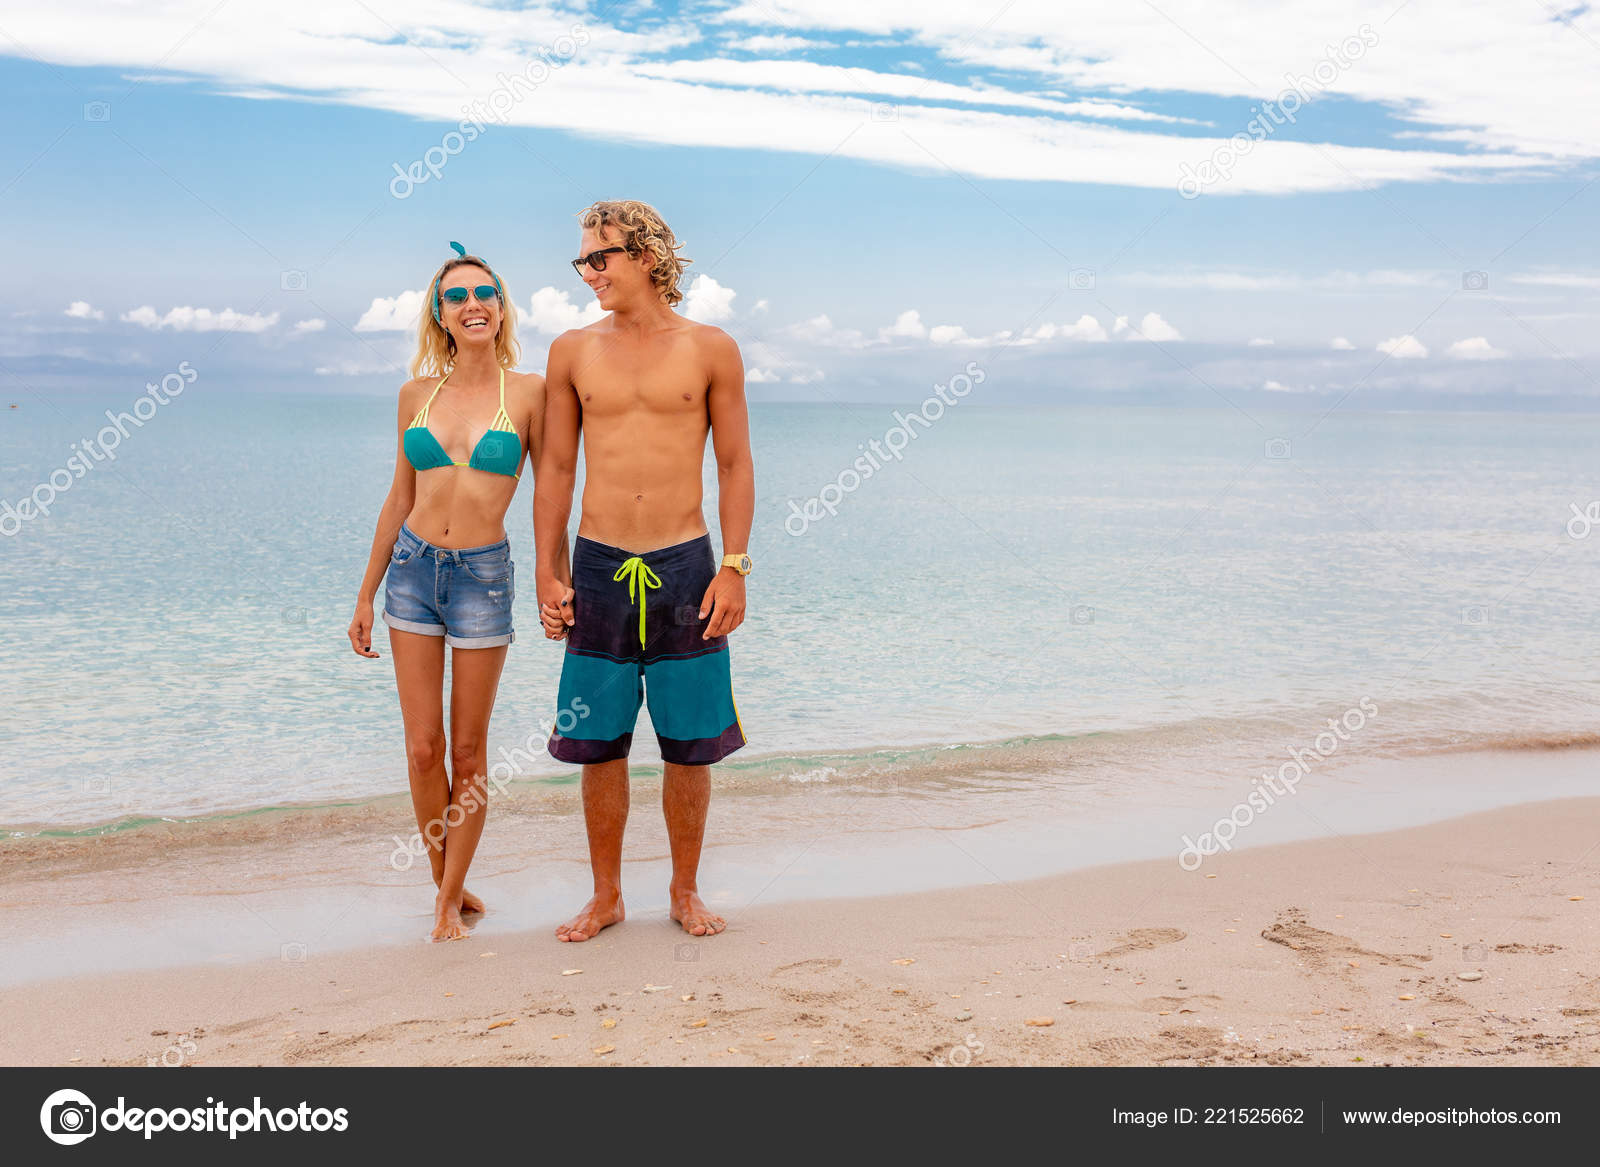 Portrait of young couple in love embracing at beach and enjoying time